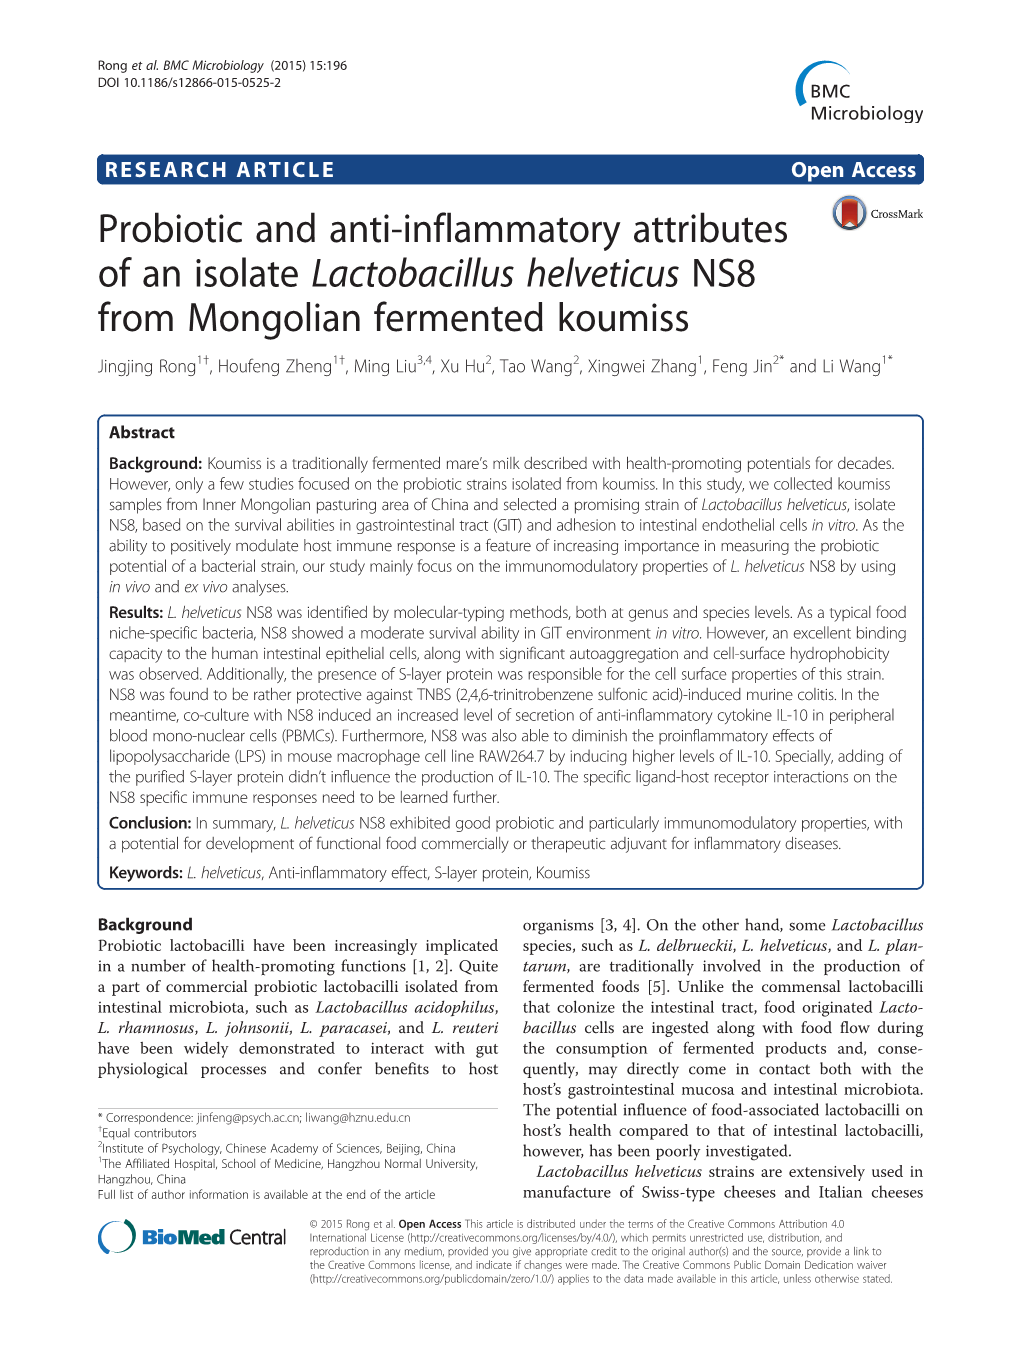 Probiotic and Anti-Inflammatory Attributes of an Isolate Lactobacillus